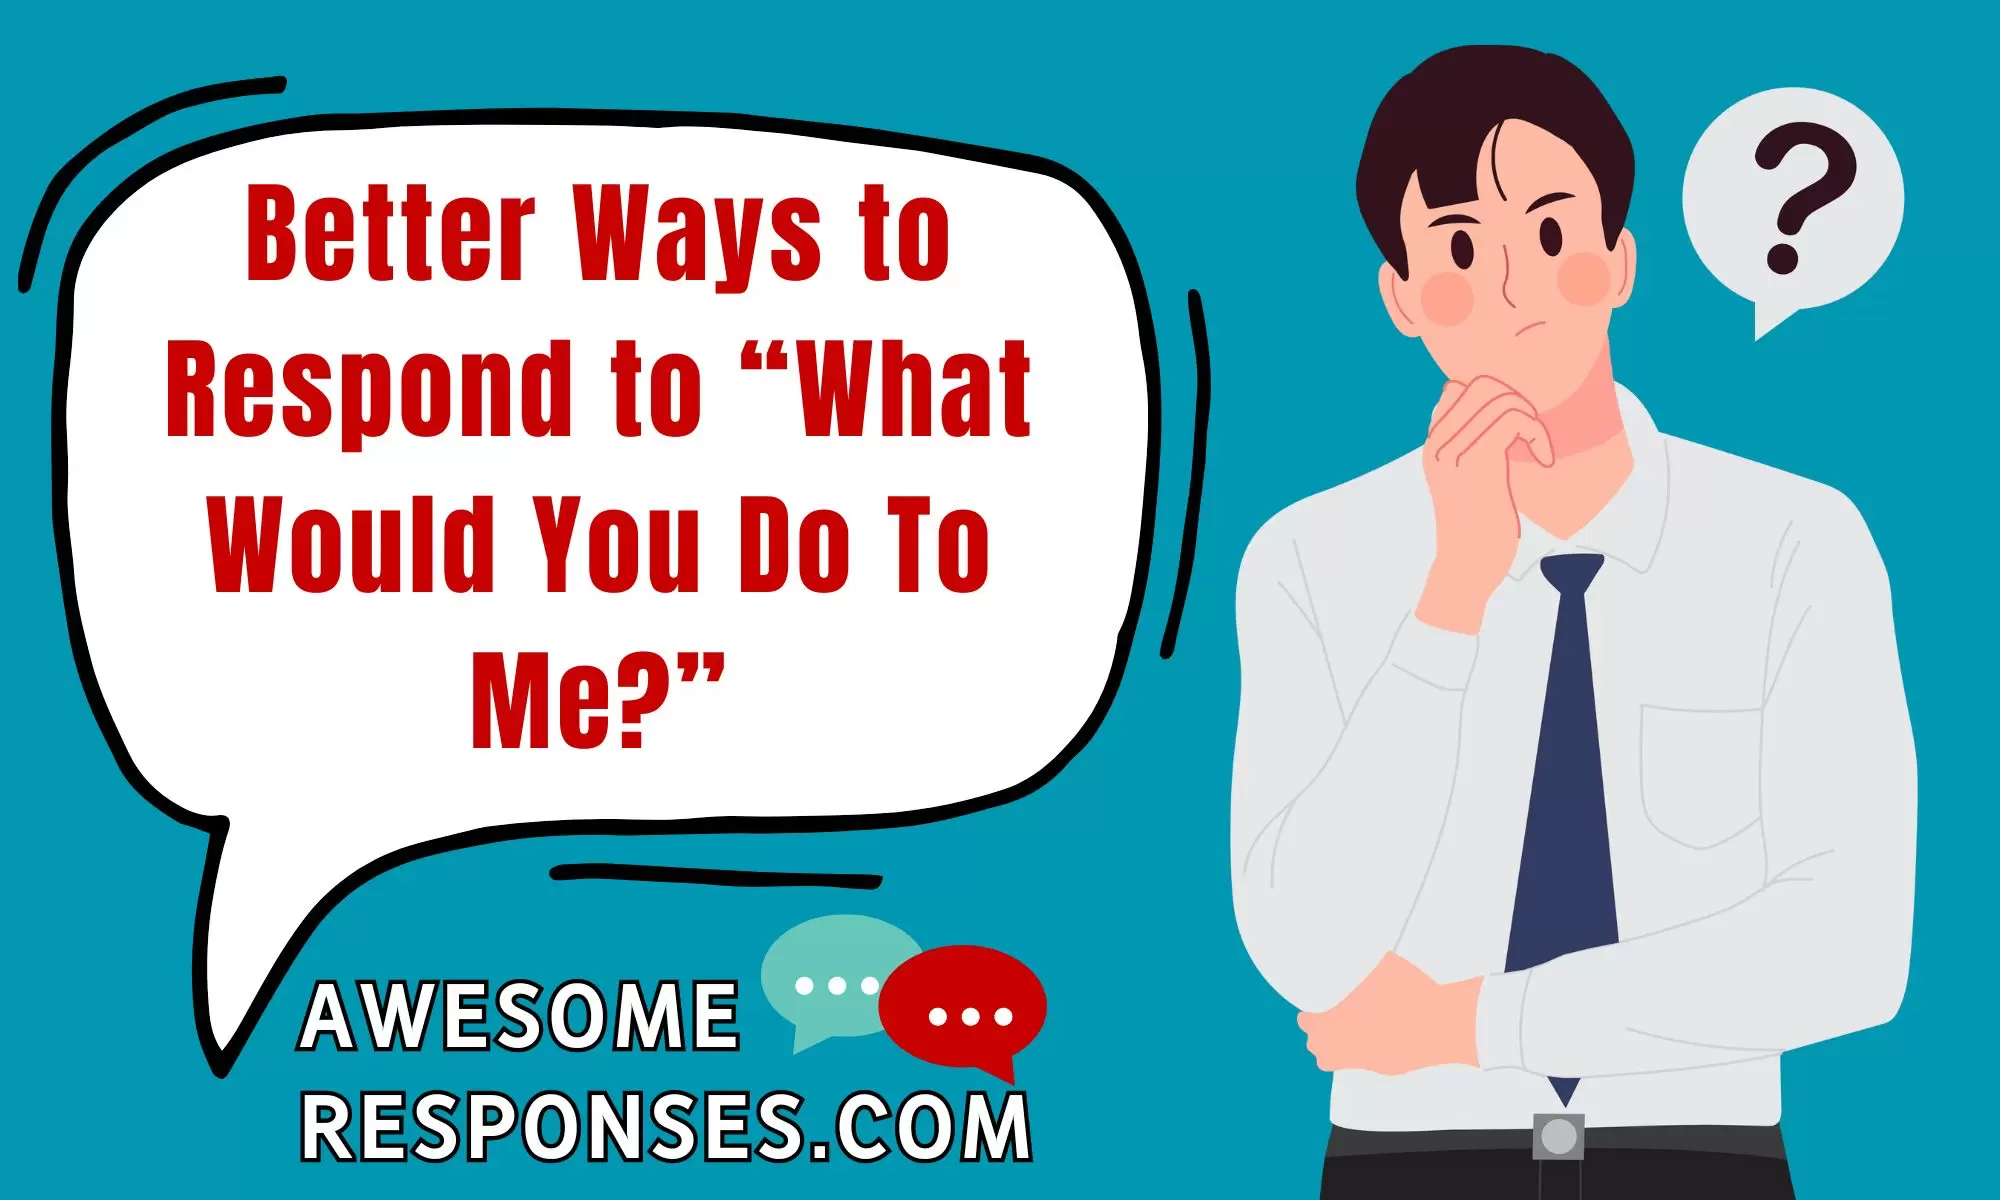 Better Ways to Respond to “What Would You Do To Me?”